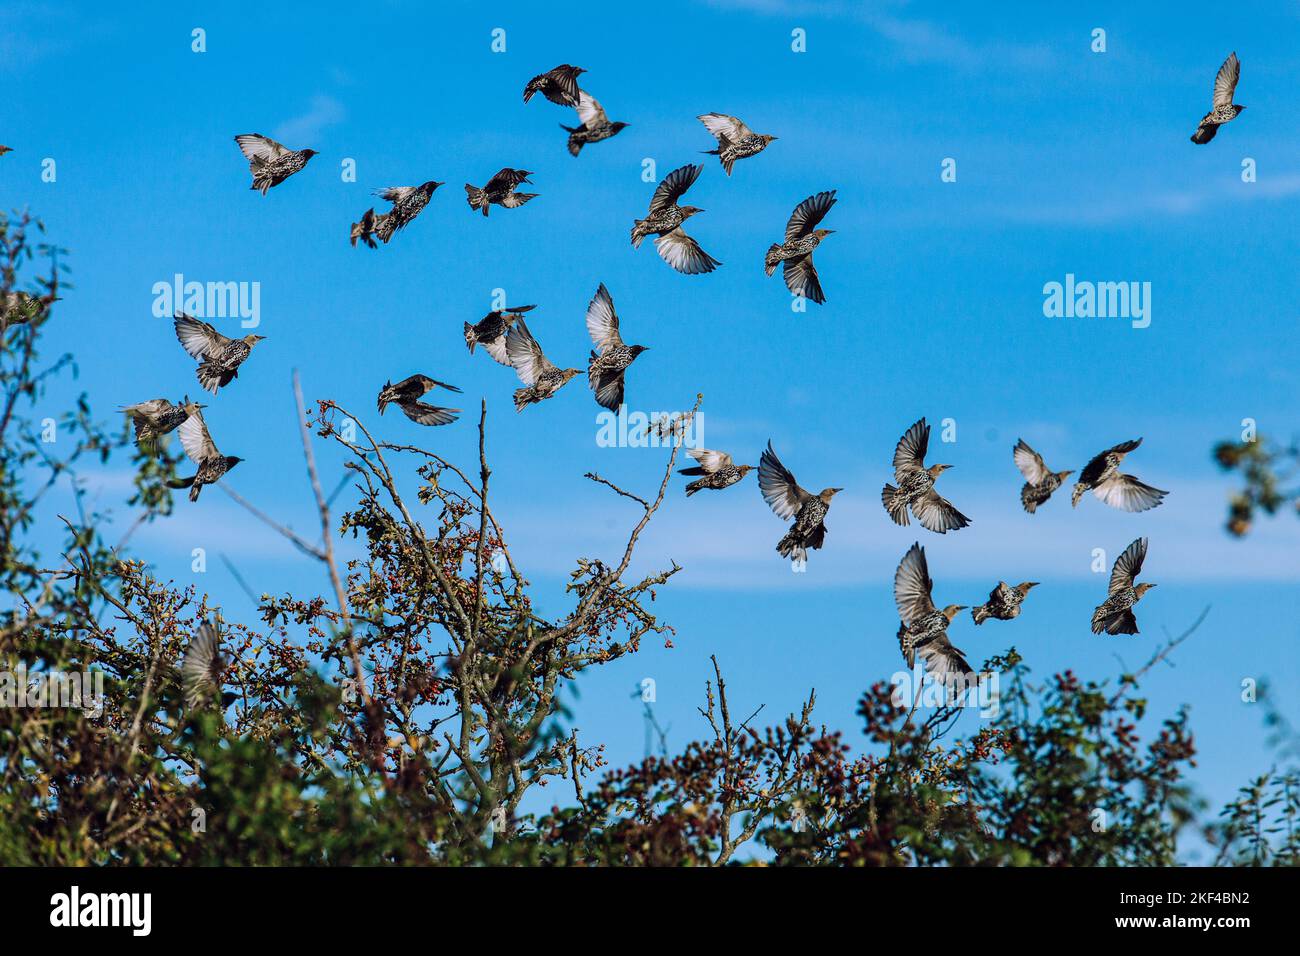 Flock of Birds Flying out of the Shrubs Stock Photo